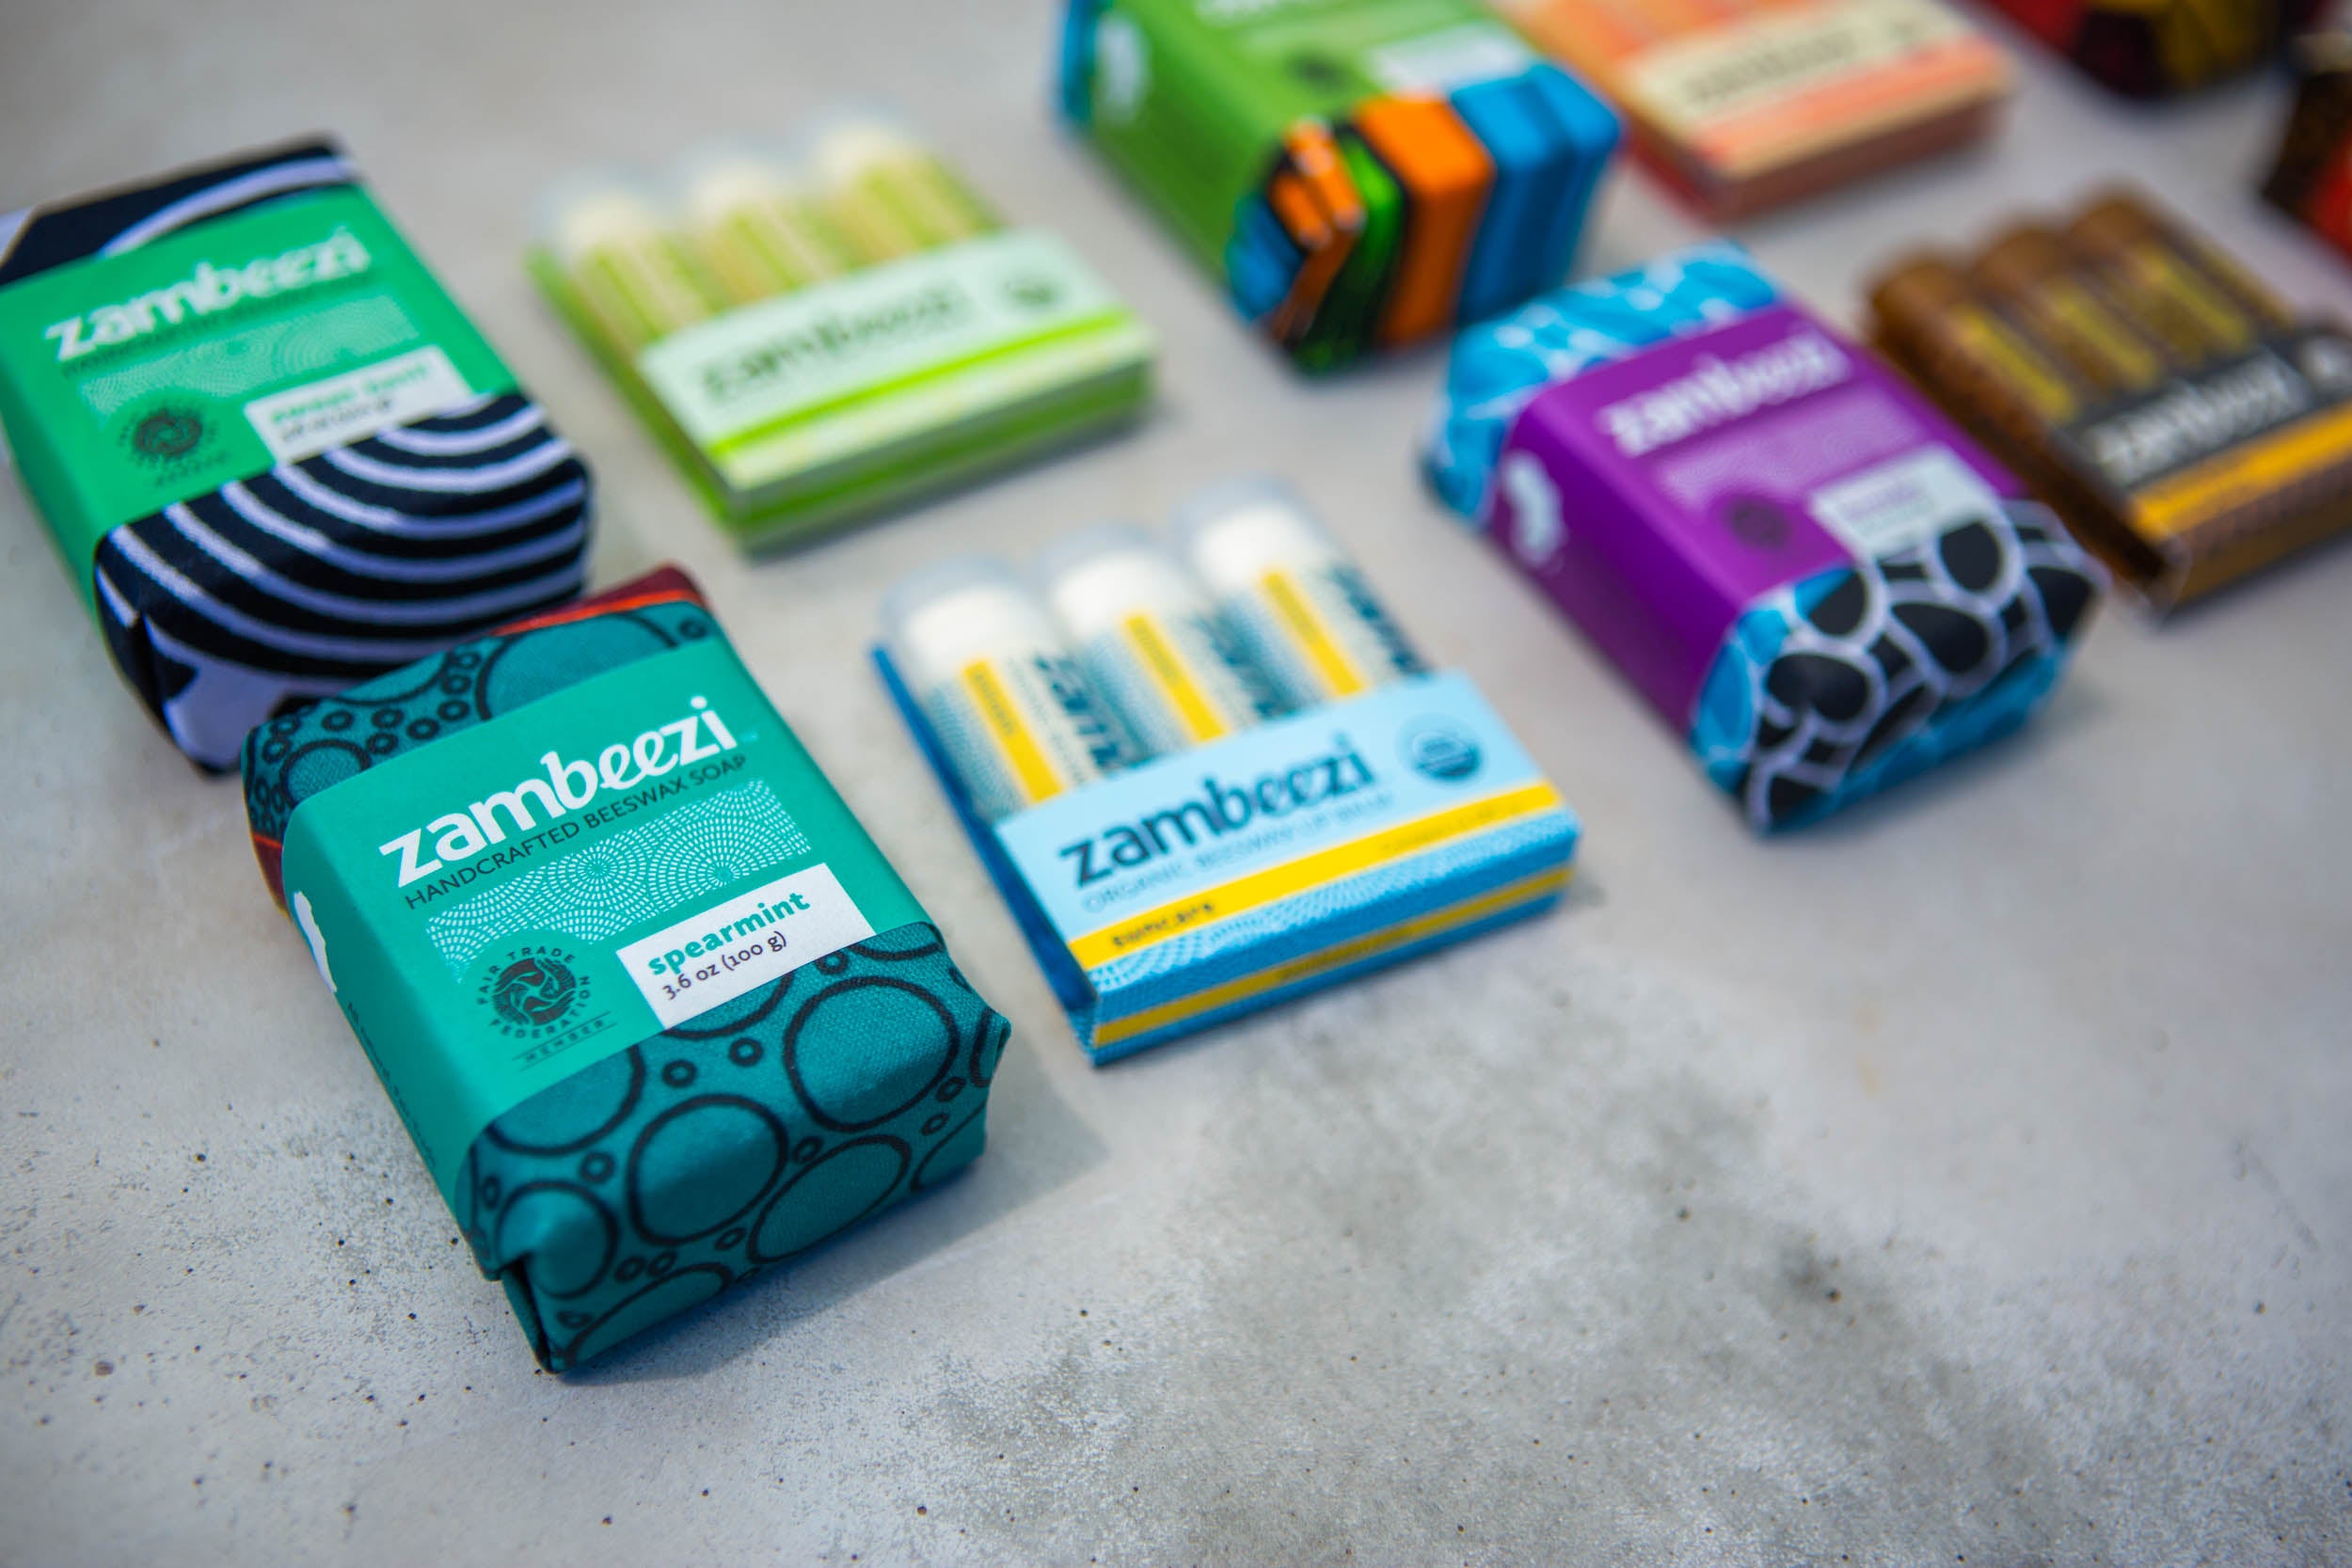 Zambeezi - our collection of organic and fair trade body care - ethical lip balm and soap